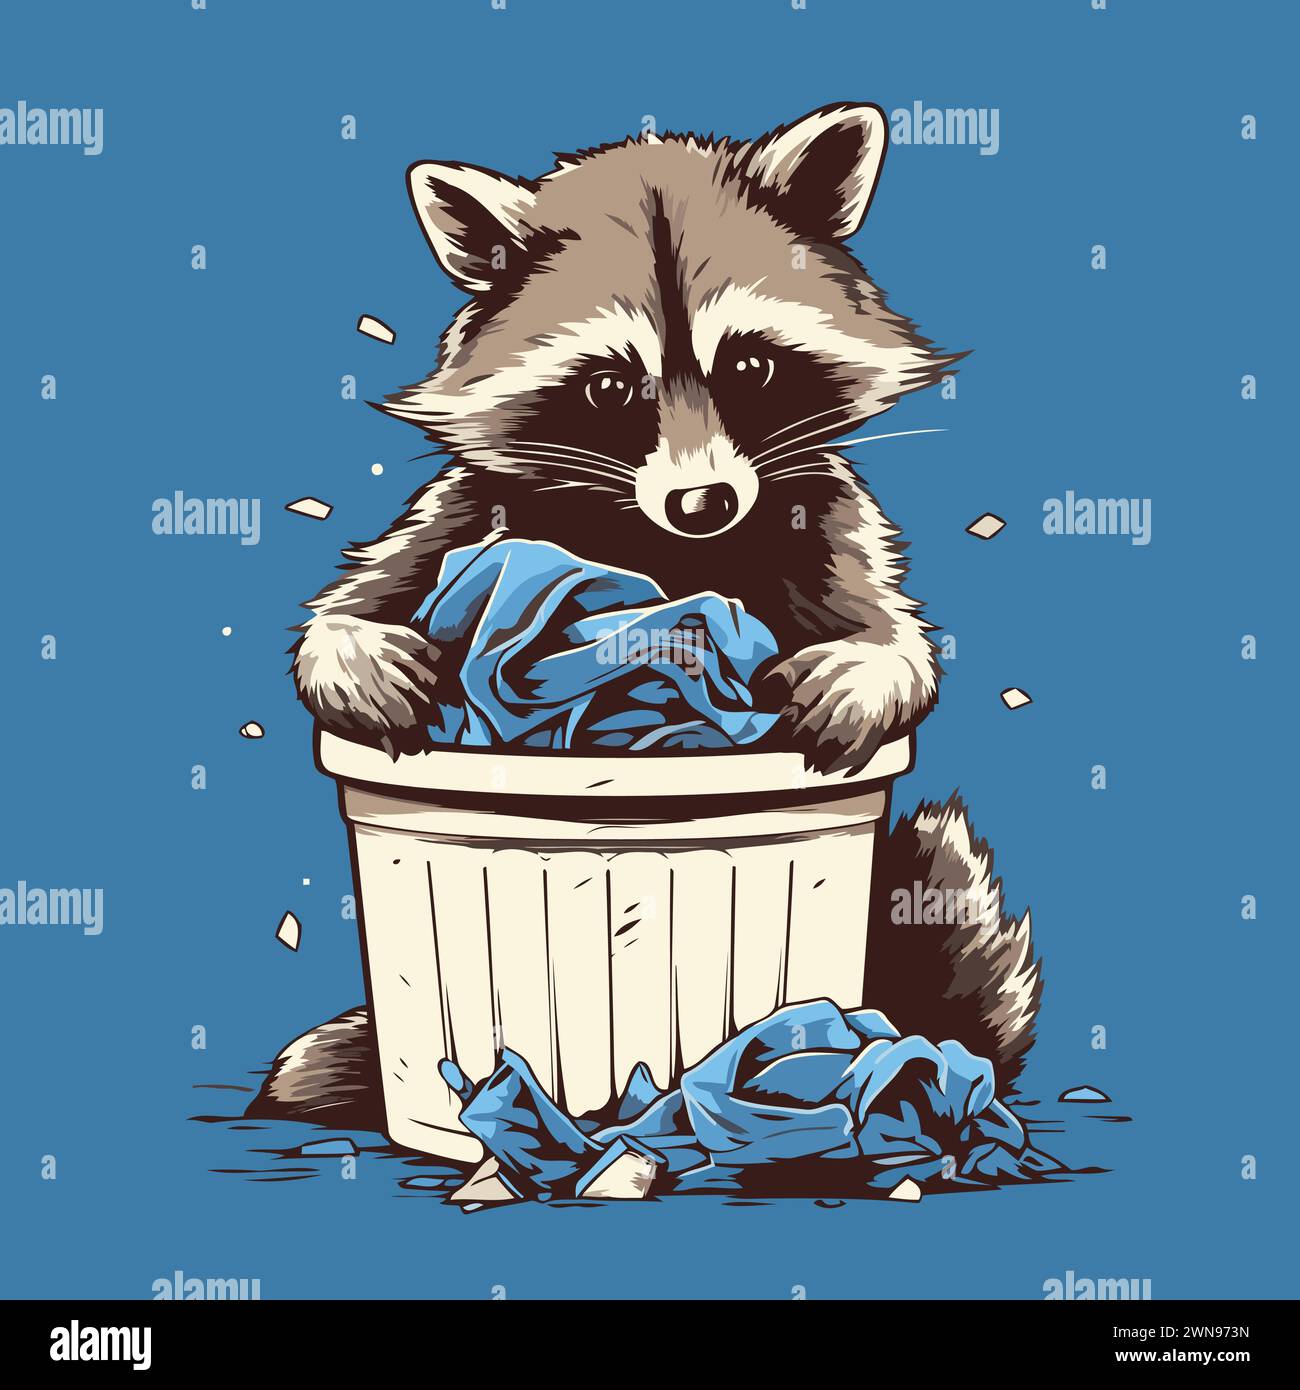 Illustration of a Raccoon in a trash can full of garbage Stock Vector